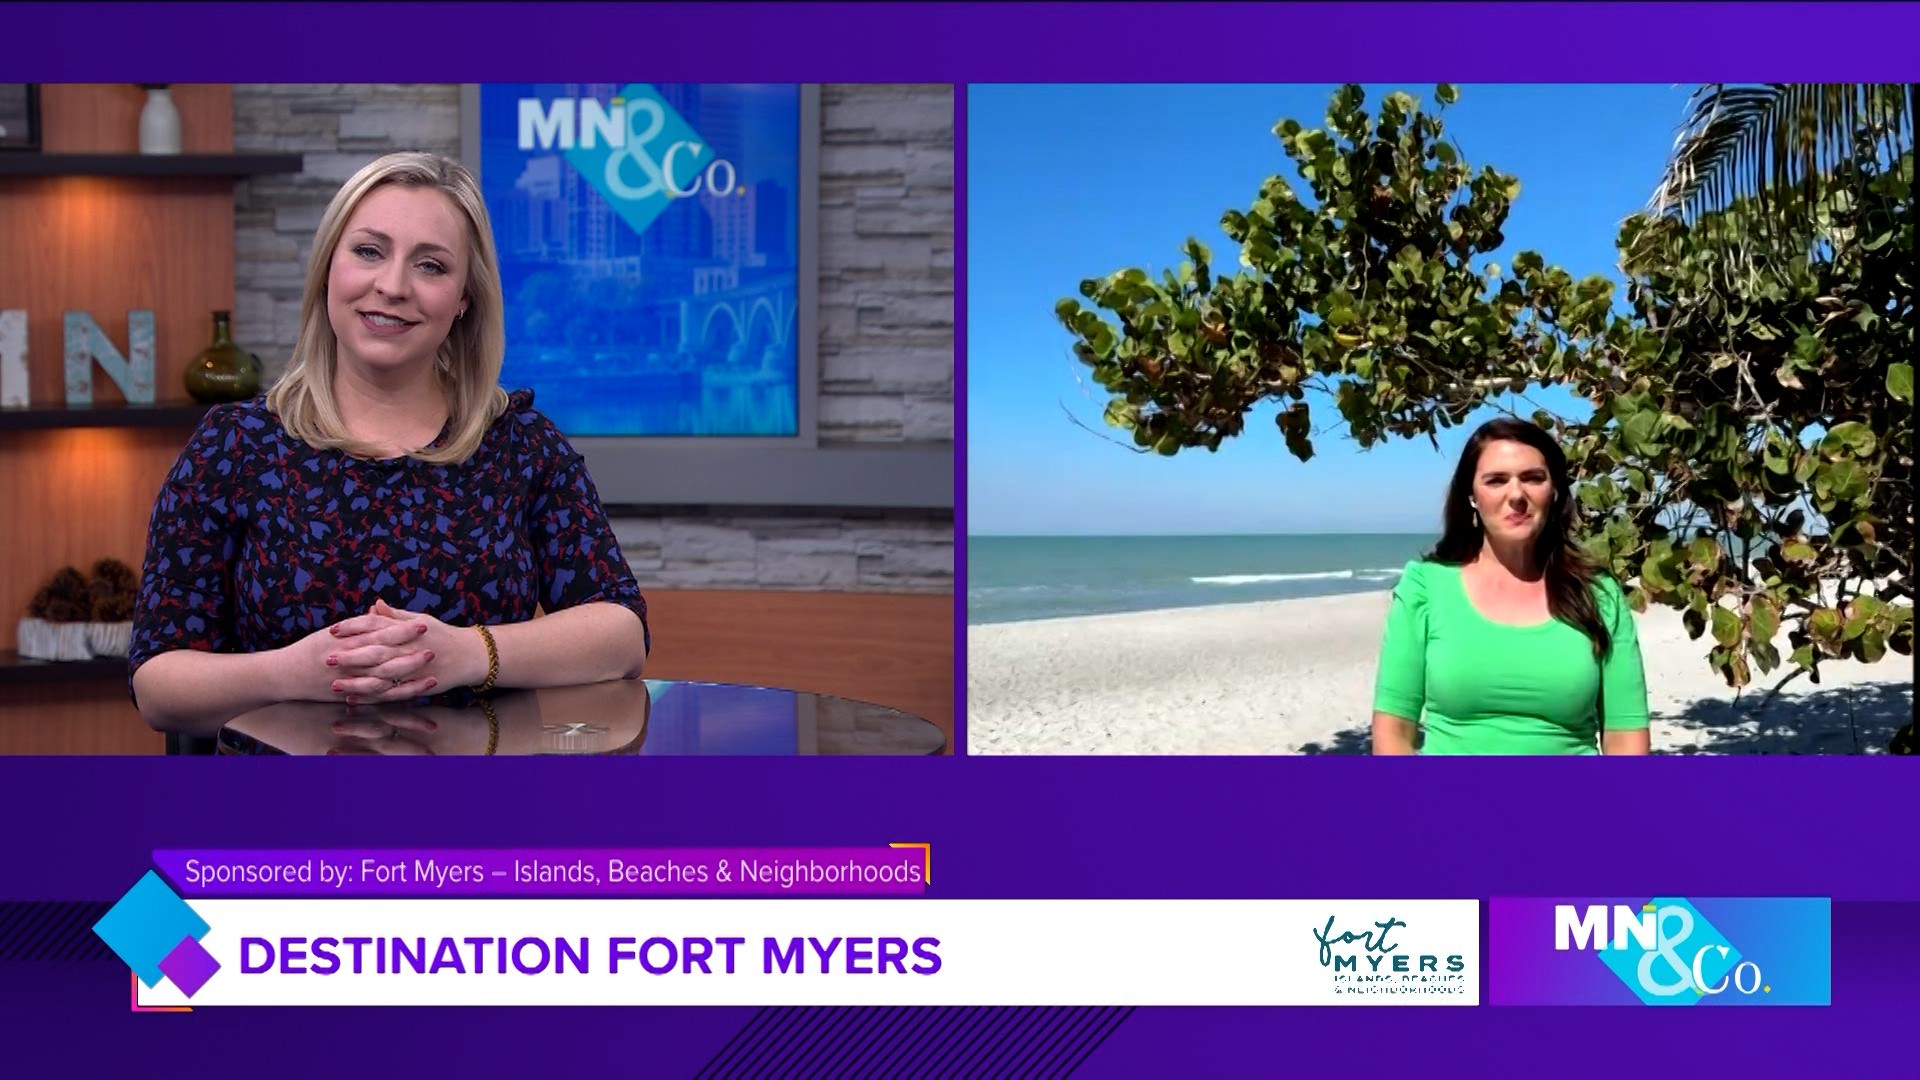 Miriam Dotson of Fort Myers joins Minnesota and Company to discuss destination in Southwest Florida with serene natural settings.